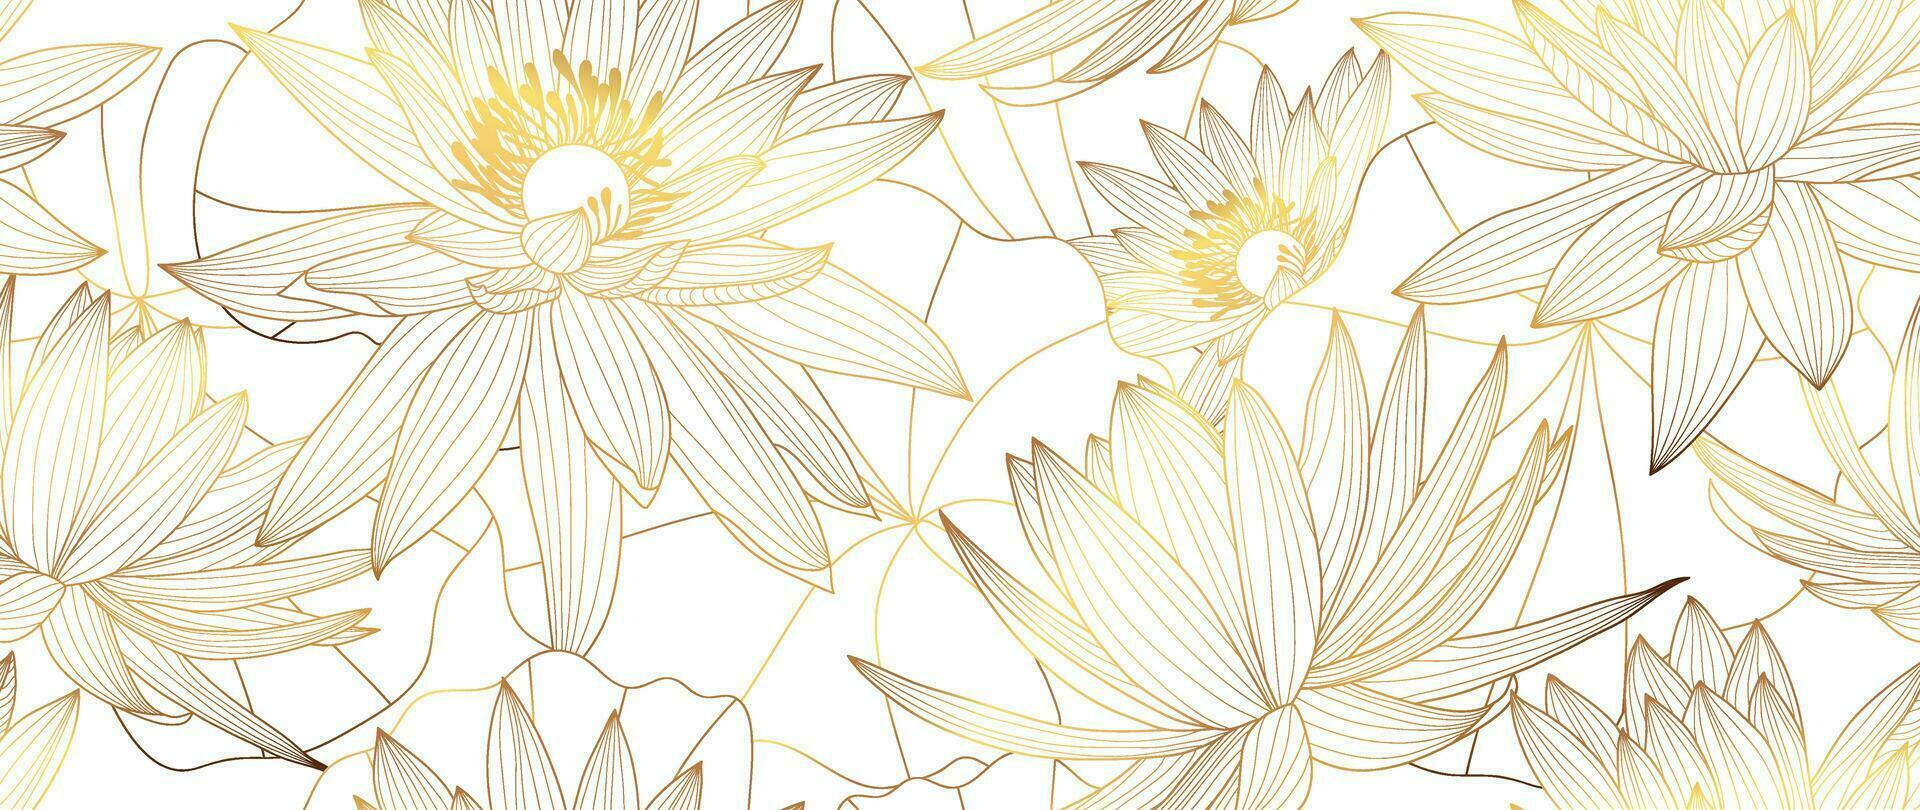 Luxury hand drawn lotus flowers background vector. Elegant gradient gold lotus flowers line art, leaves on white background. Oriental design for wedding invitation, cover, print, decoration, template. vector